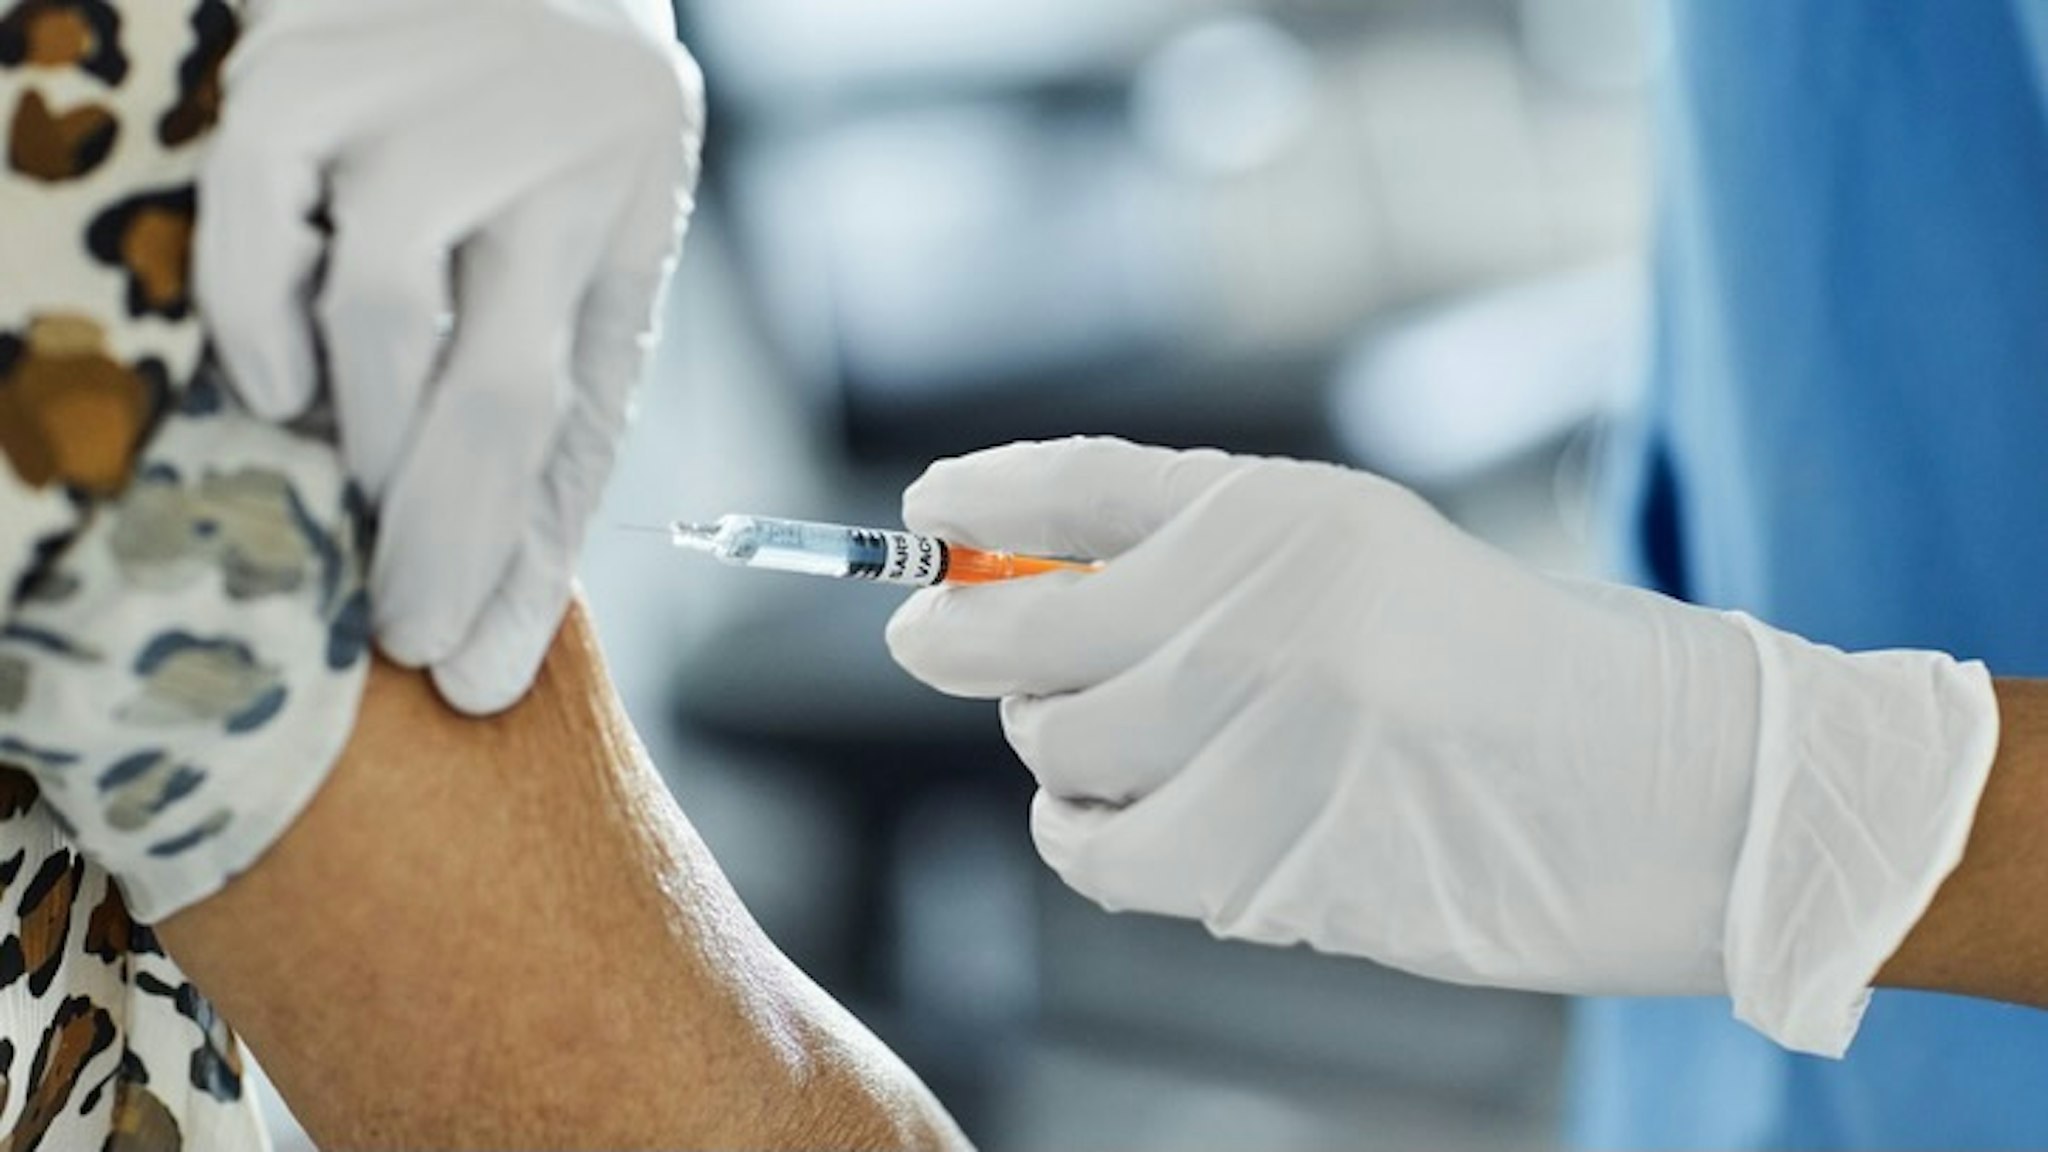 Spanish Hospital Administers Some Of The Country's First Covid-19 Vaccination Shots - stock photo Cropped image of nurse injecting Covid-19 Vaccine to a patient. Female healthcare worker is working at hospital. She is holding syringe. Morsa Images via Getty Images